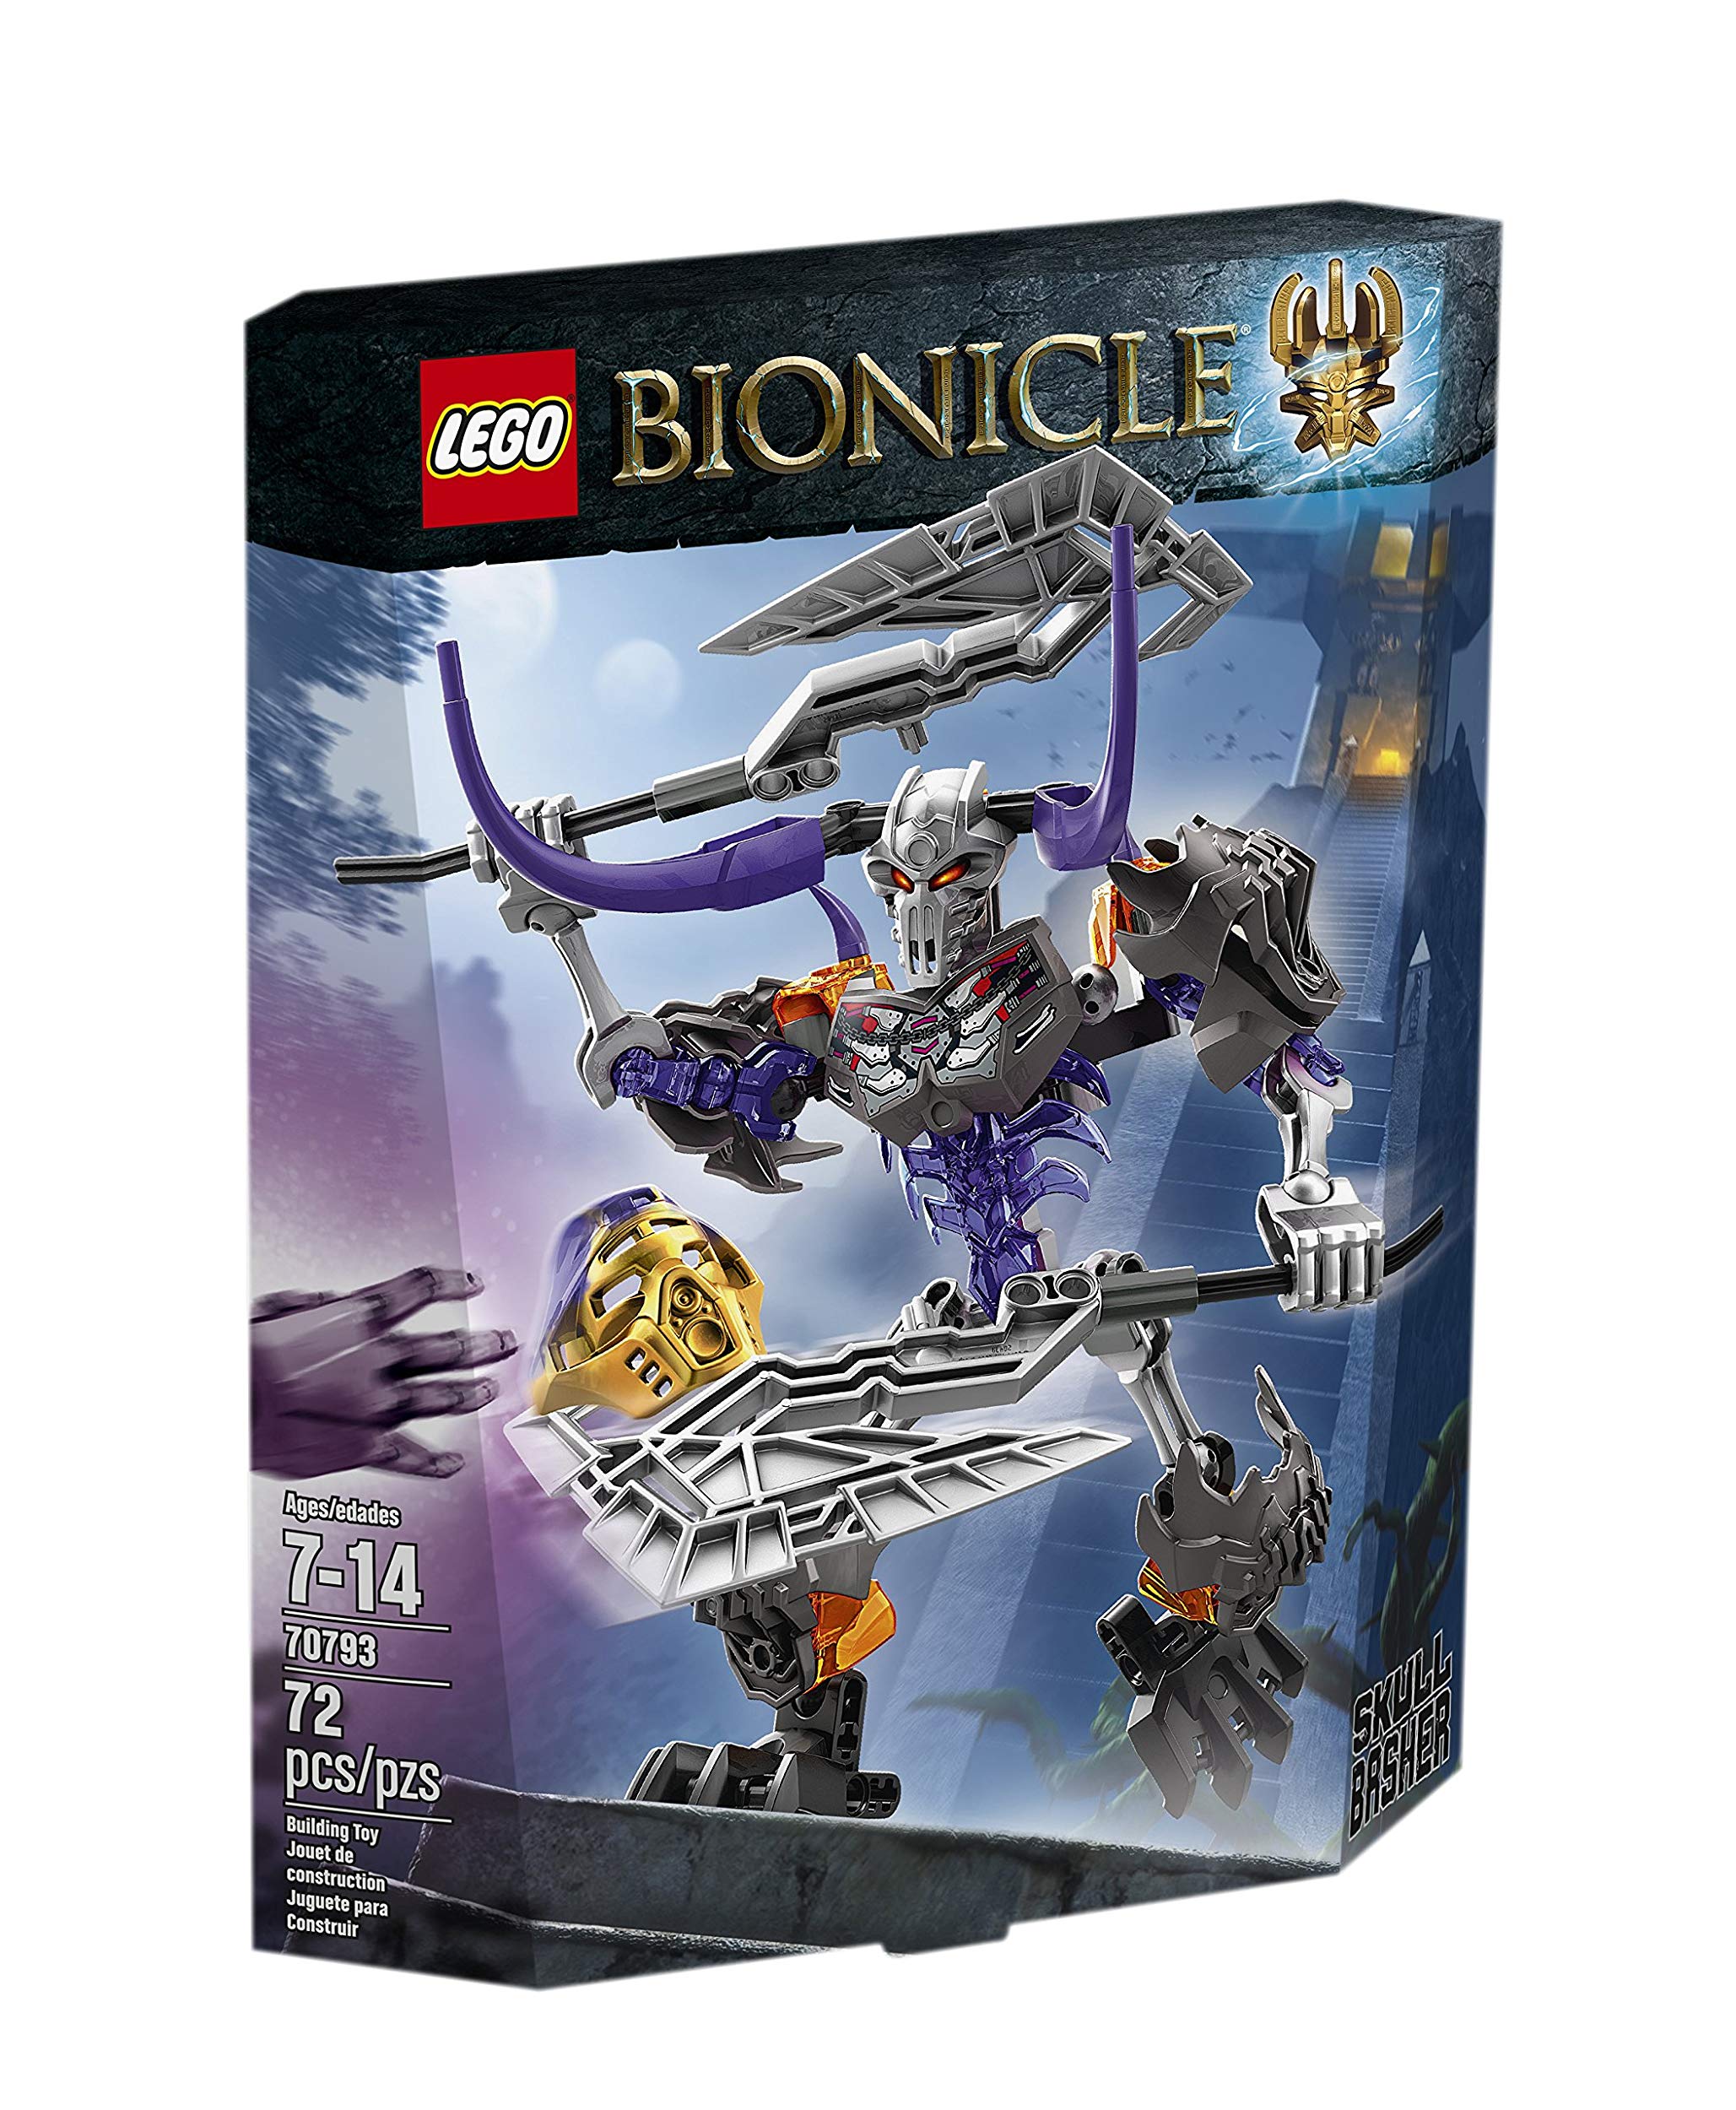 Lego Bionicle In Skull Basher Building Kit By Lego